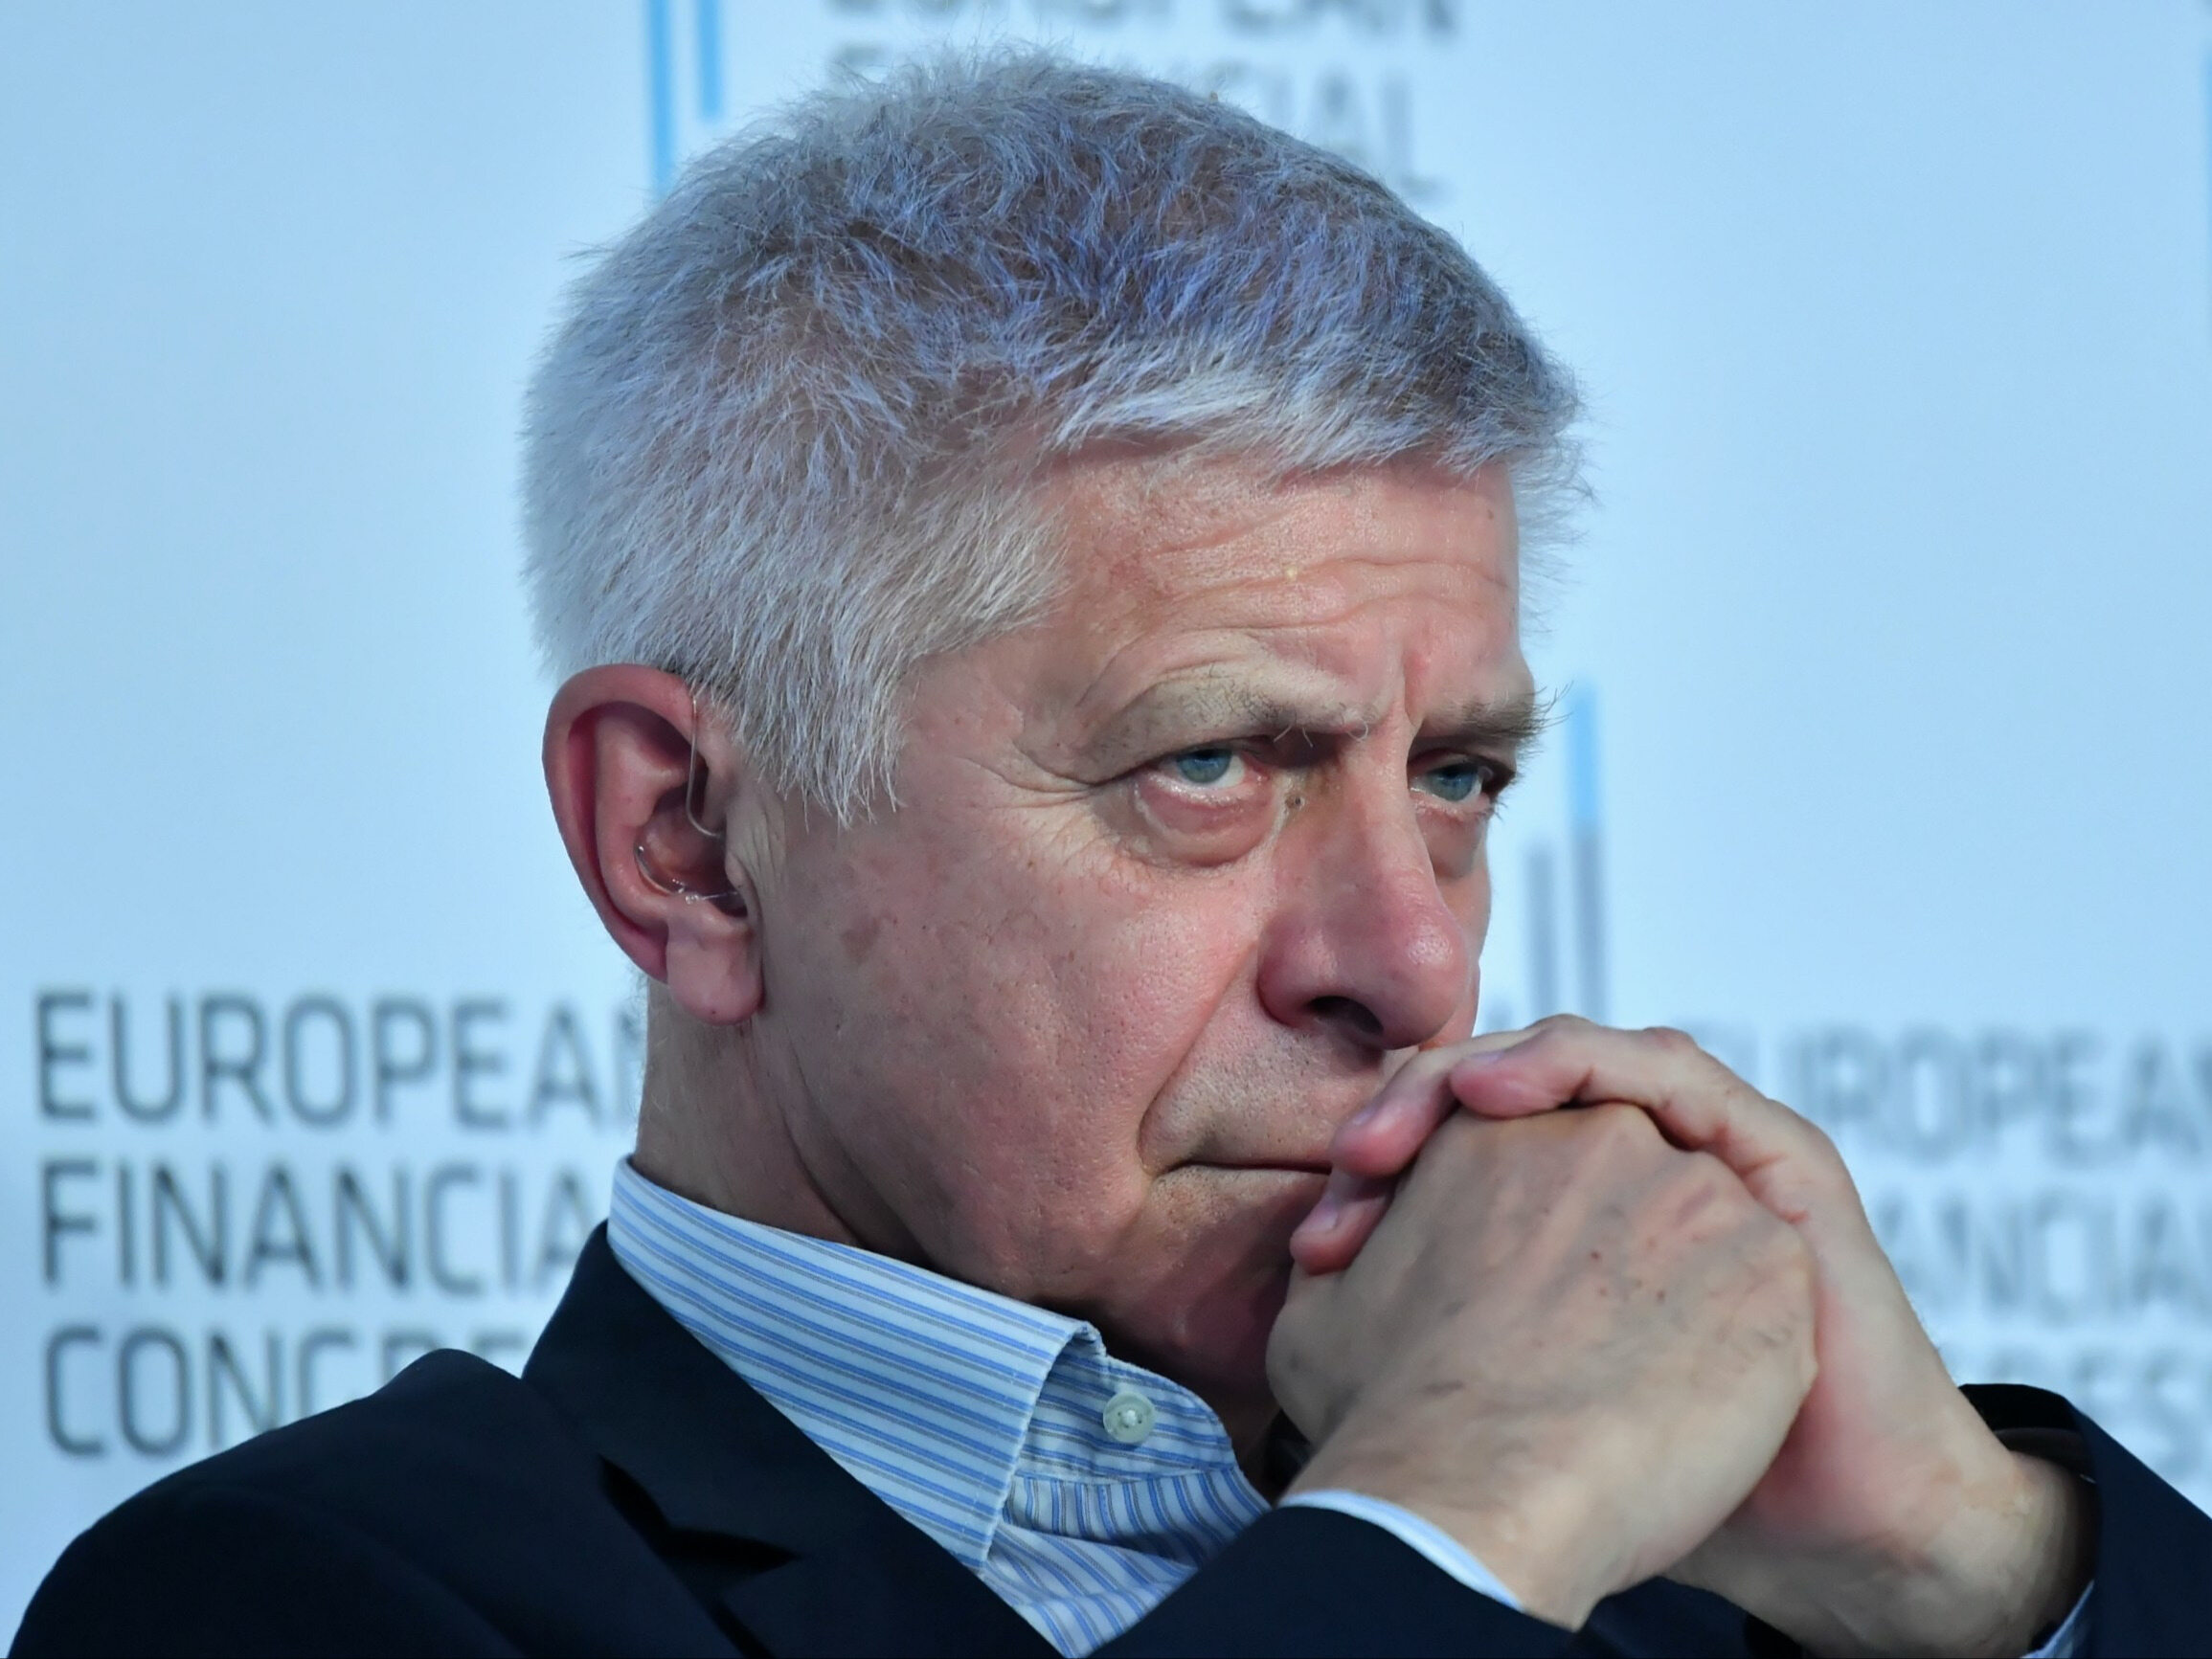 Belka is afraid of "terrible surprises" after the PiS government.  He's talking about the missing millions